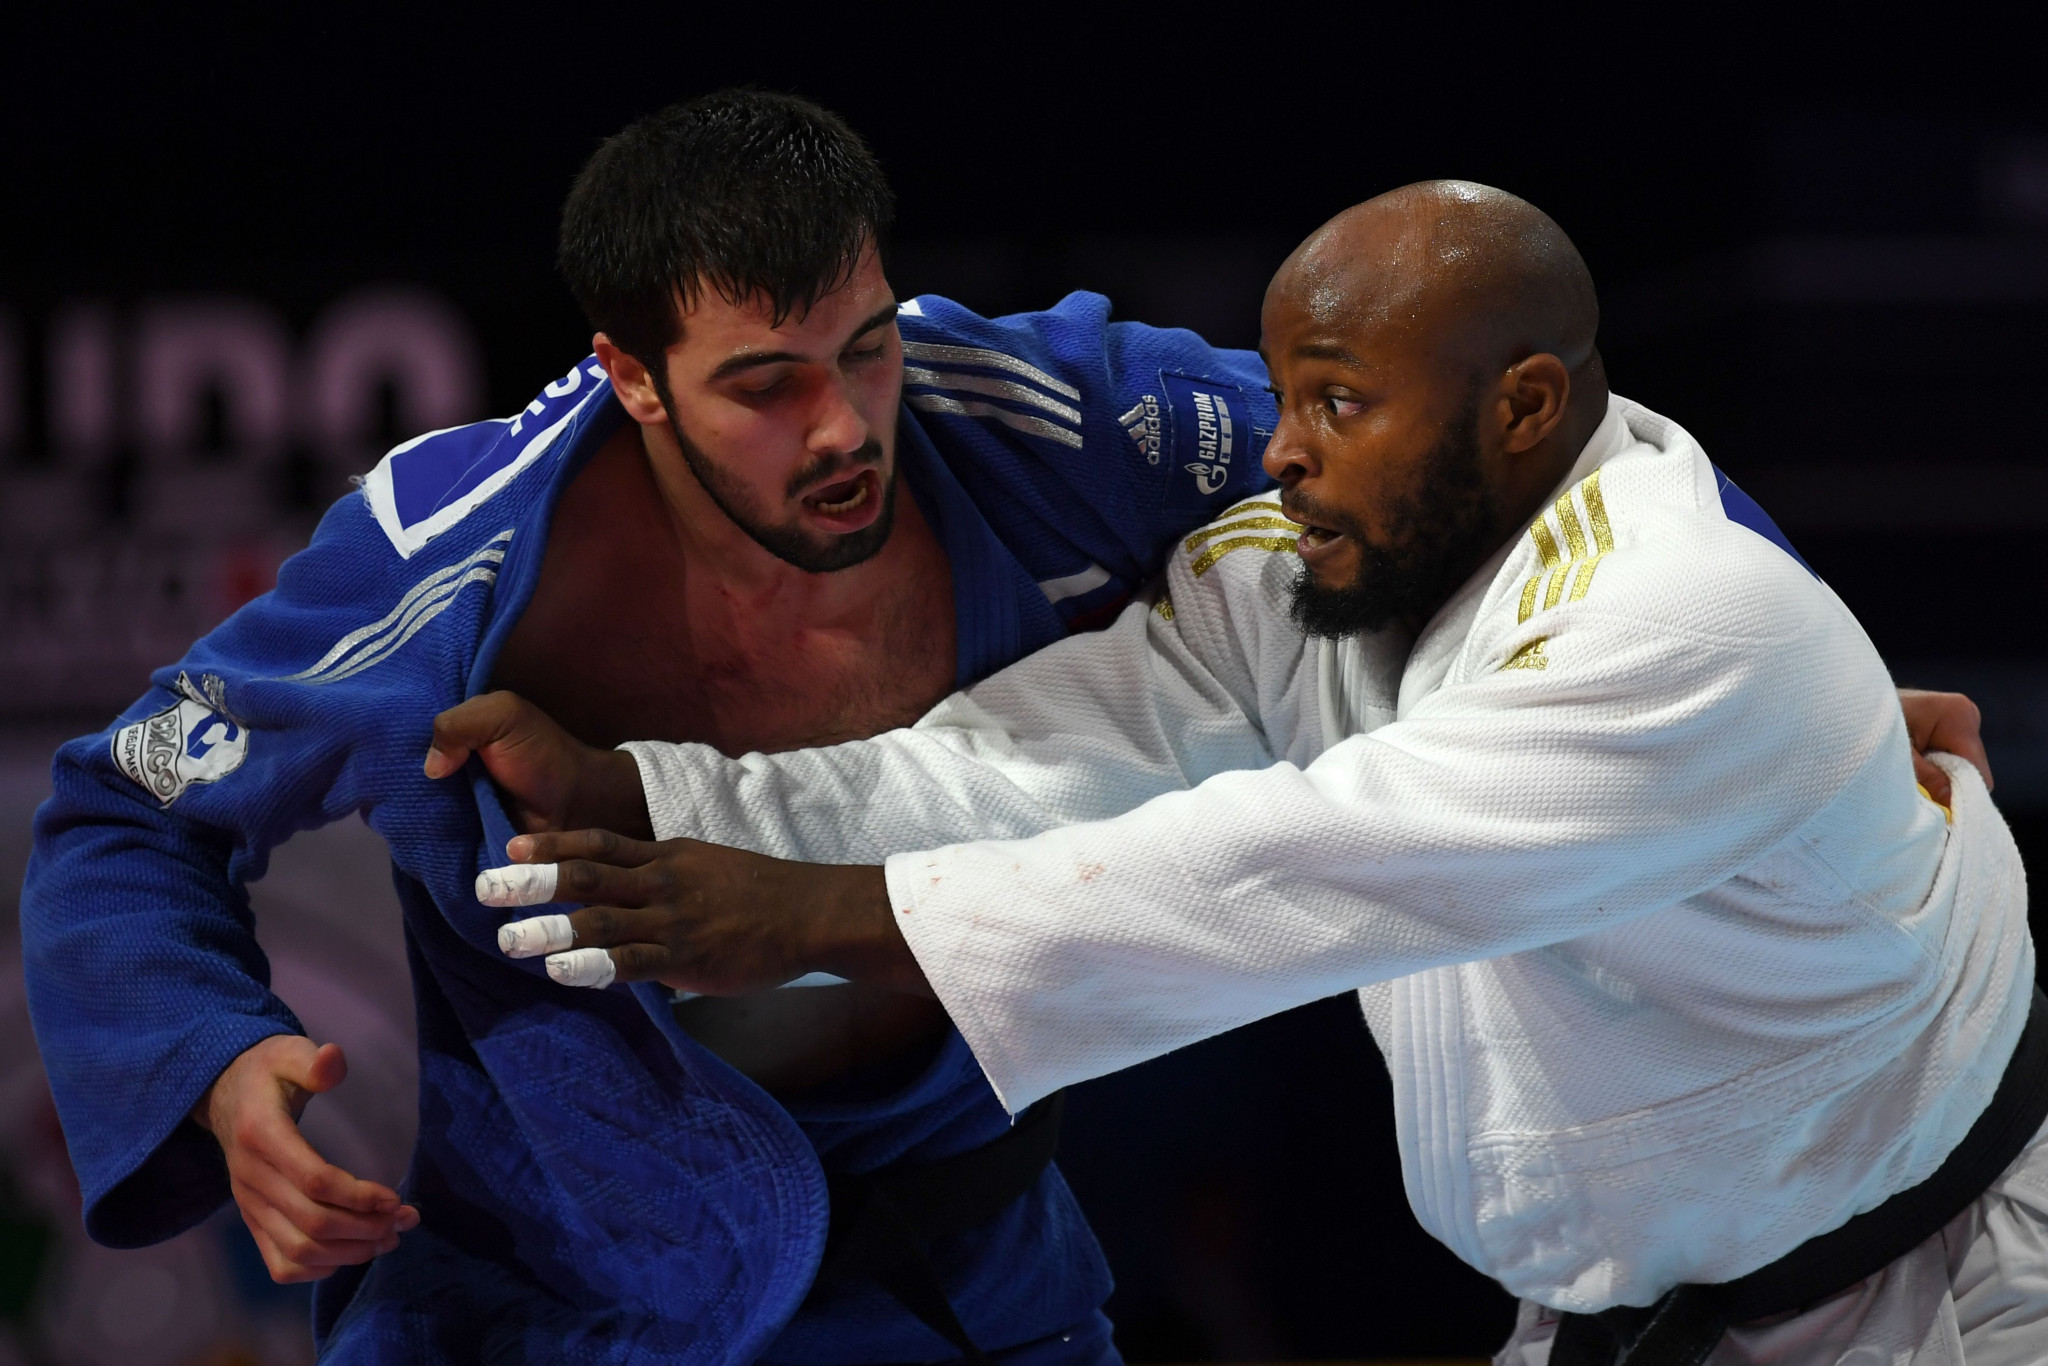 Jorge Fonseca, in white, won the under-100 kilogram category with some thrilling judo ©Getty Images